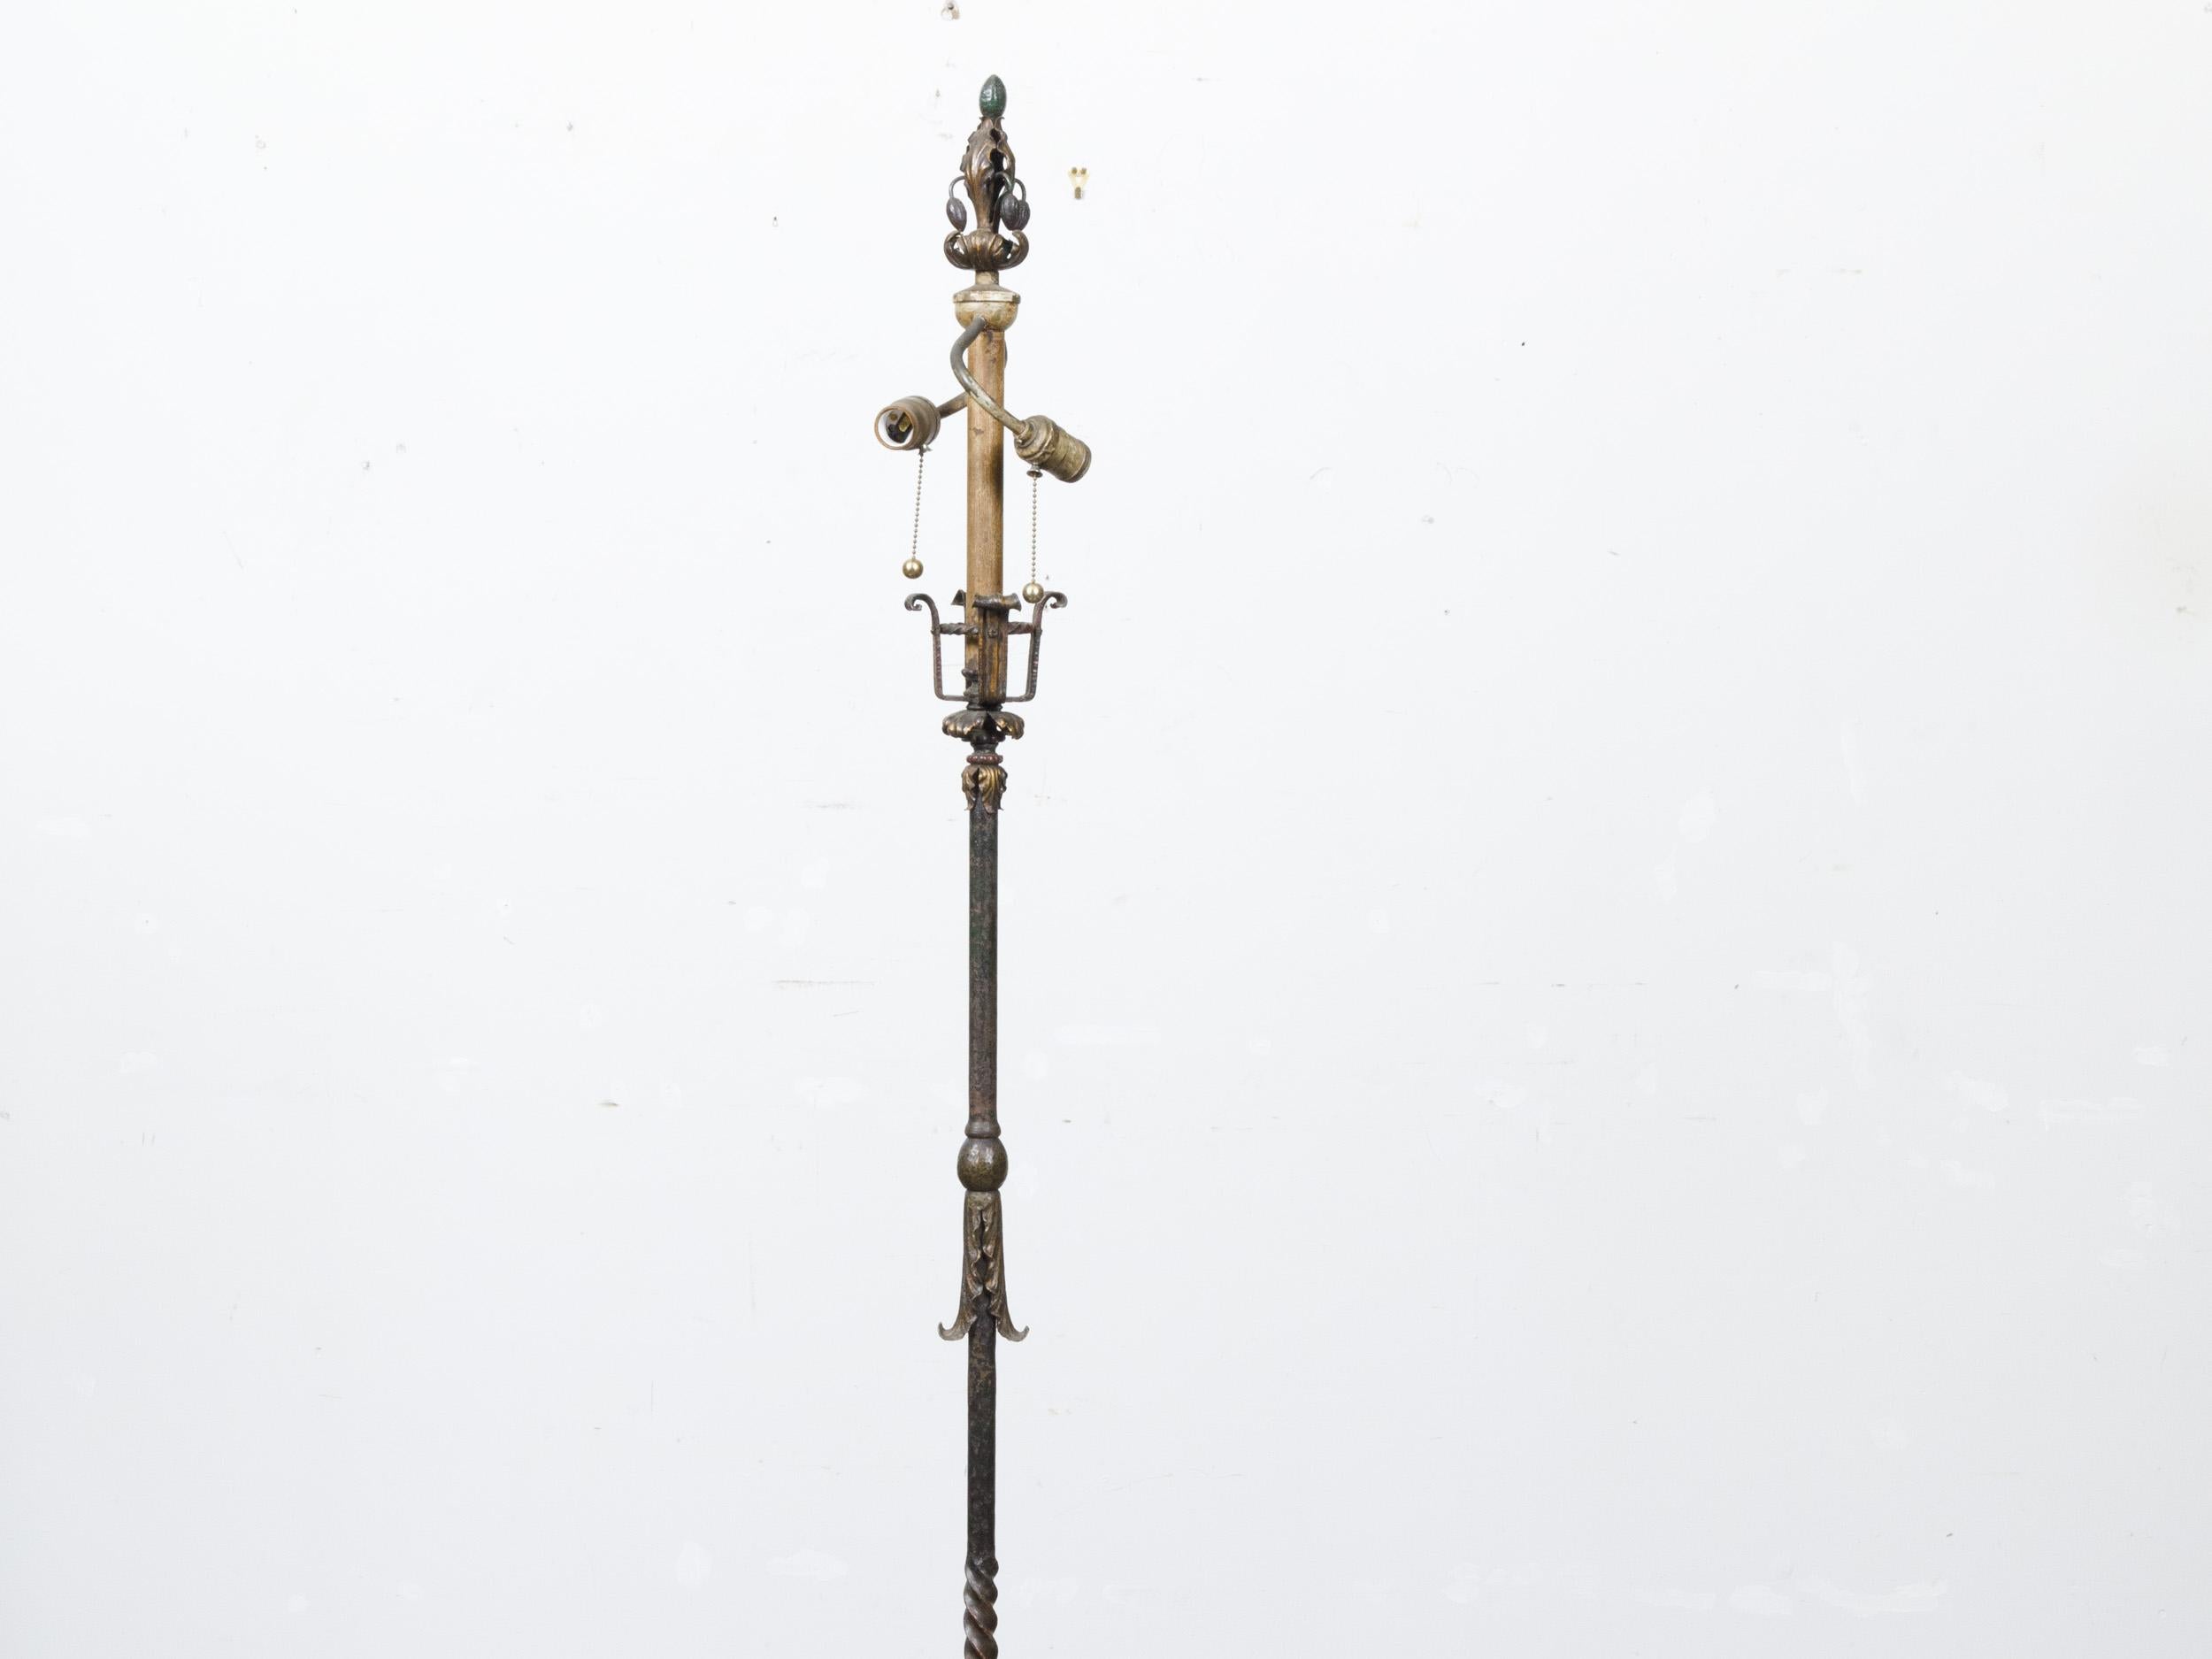 French Steel and Brass 1930s Floor Lamp with Scrolling Legs and Foliage Motifs For Sale 8